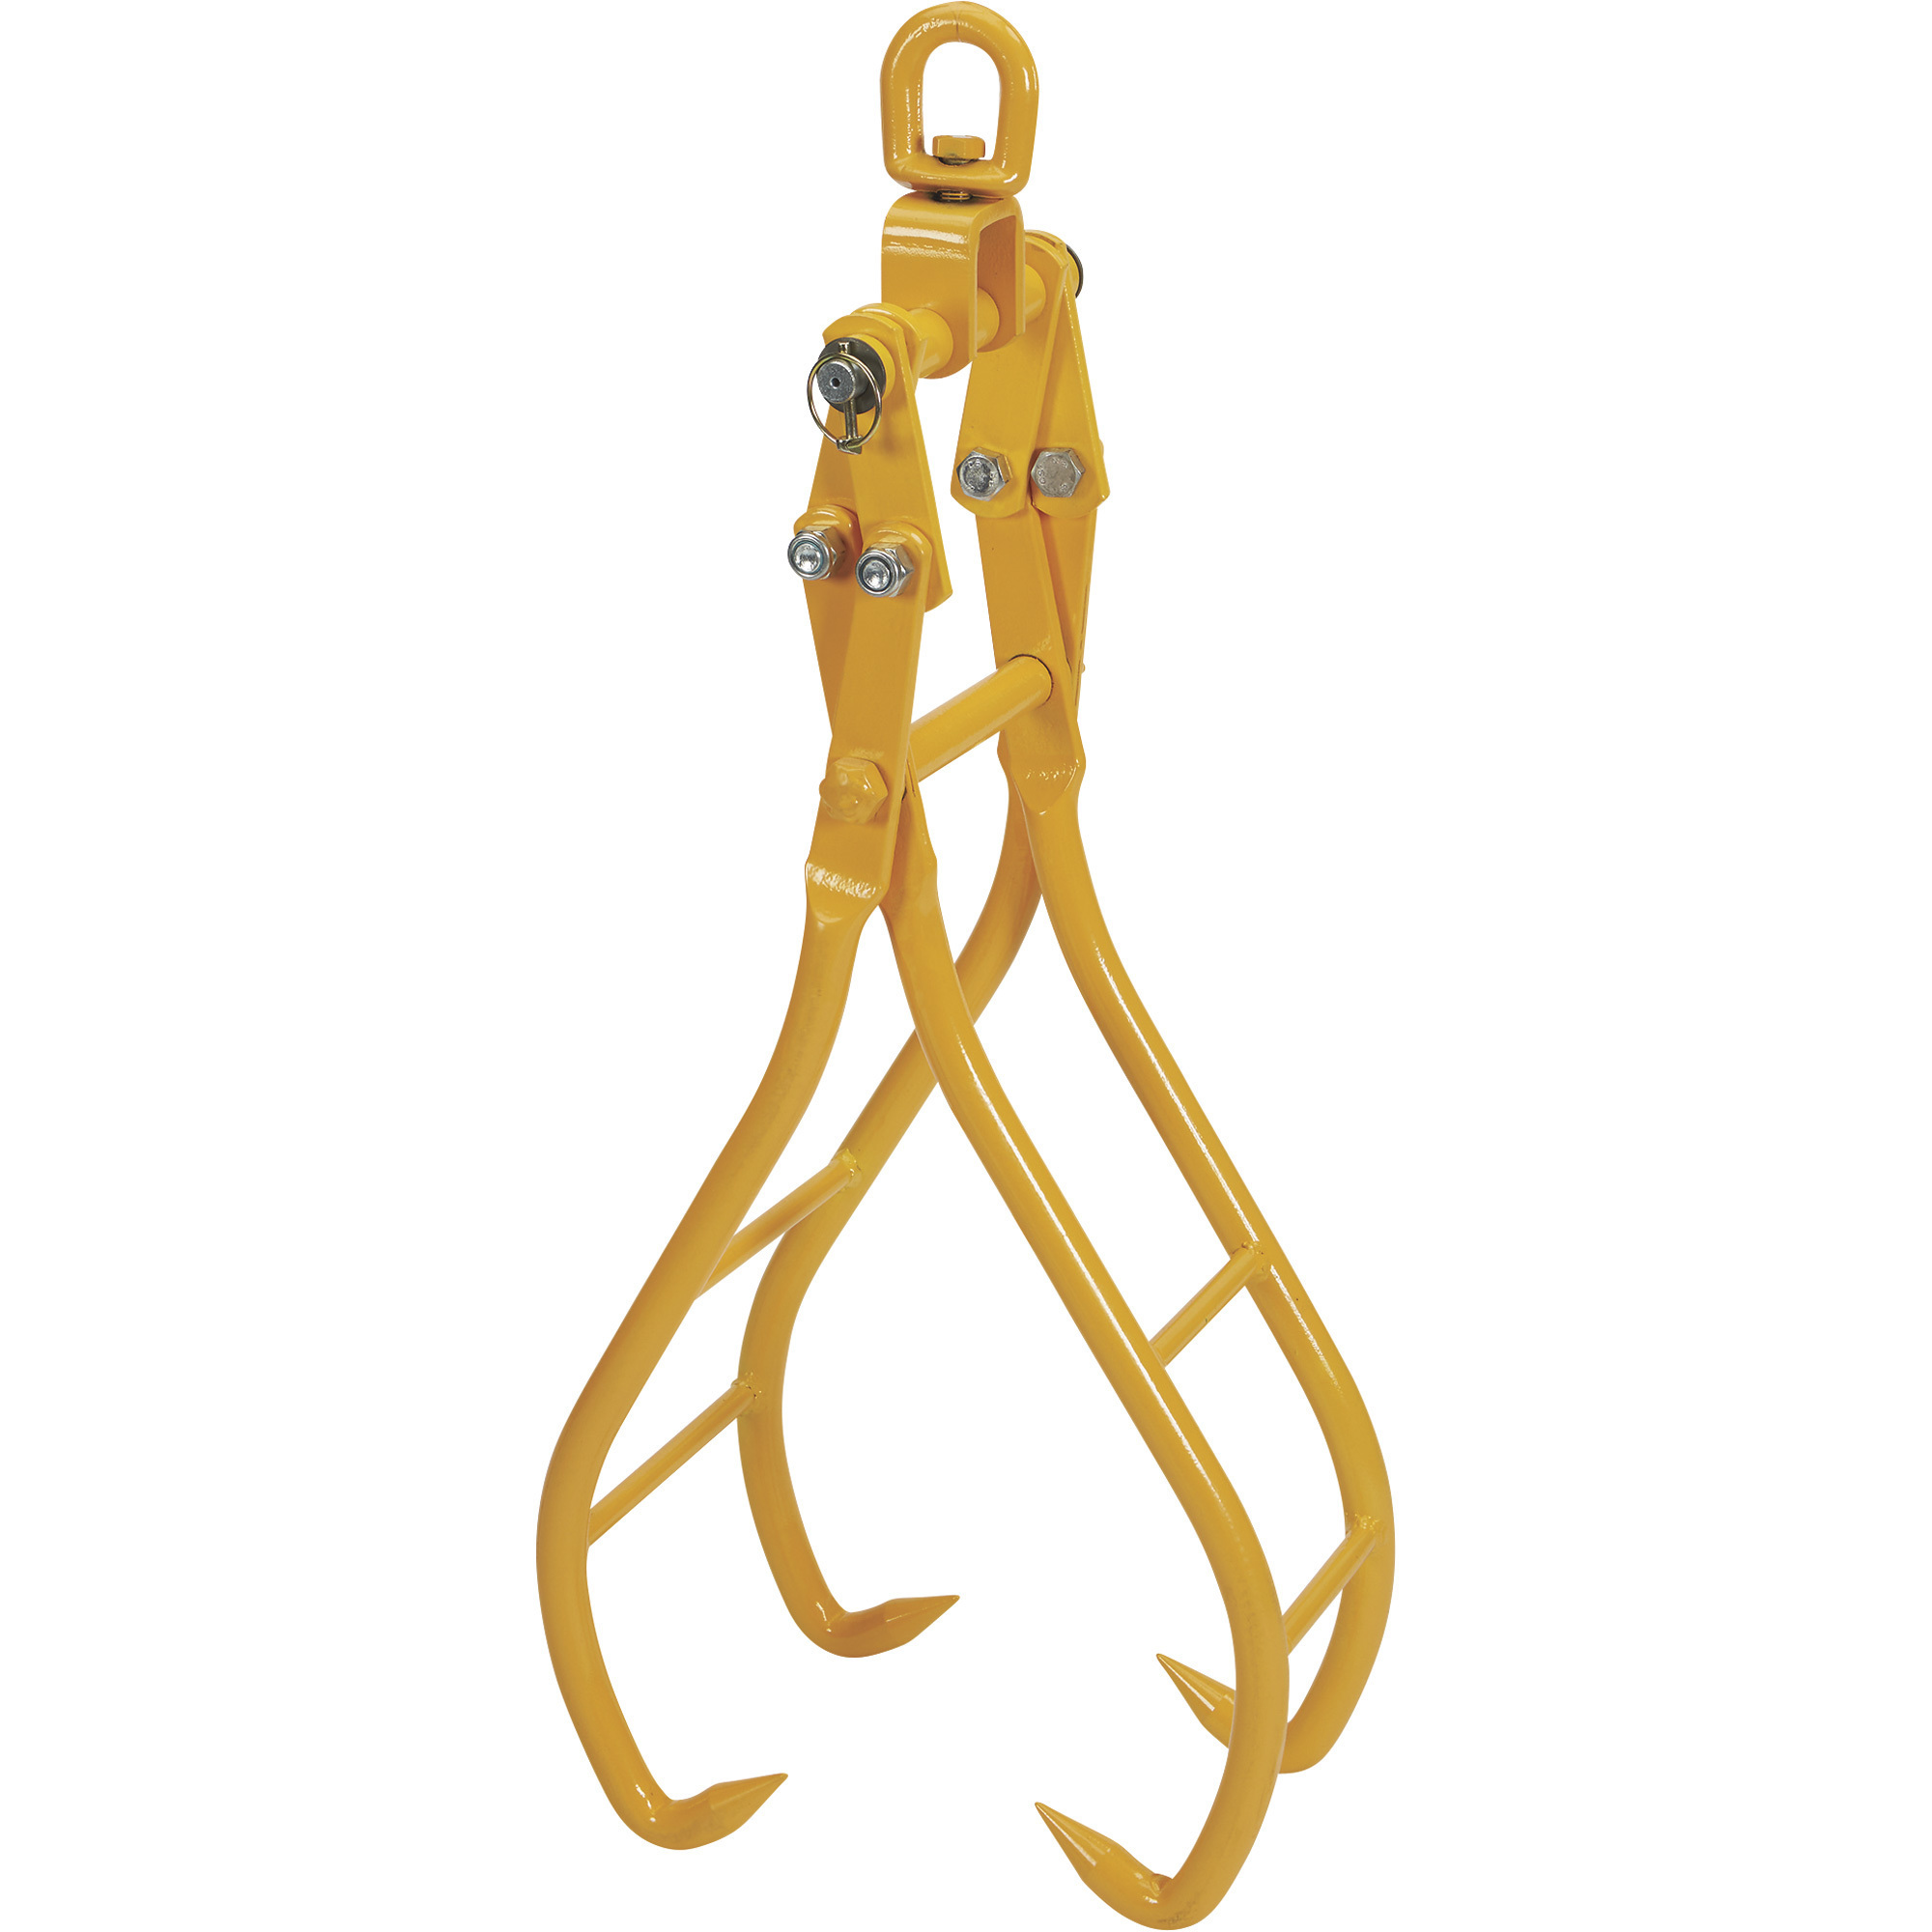 Roughneck Lifting Tongs - 36Inch Jaw Opening, 3,300-Lb. Capacity